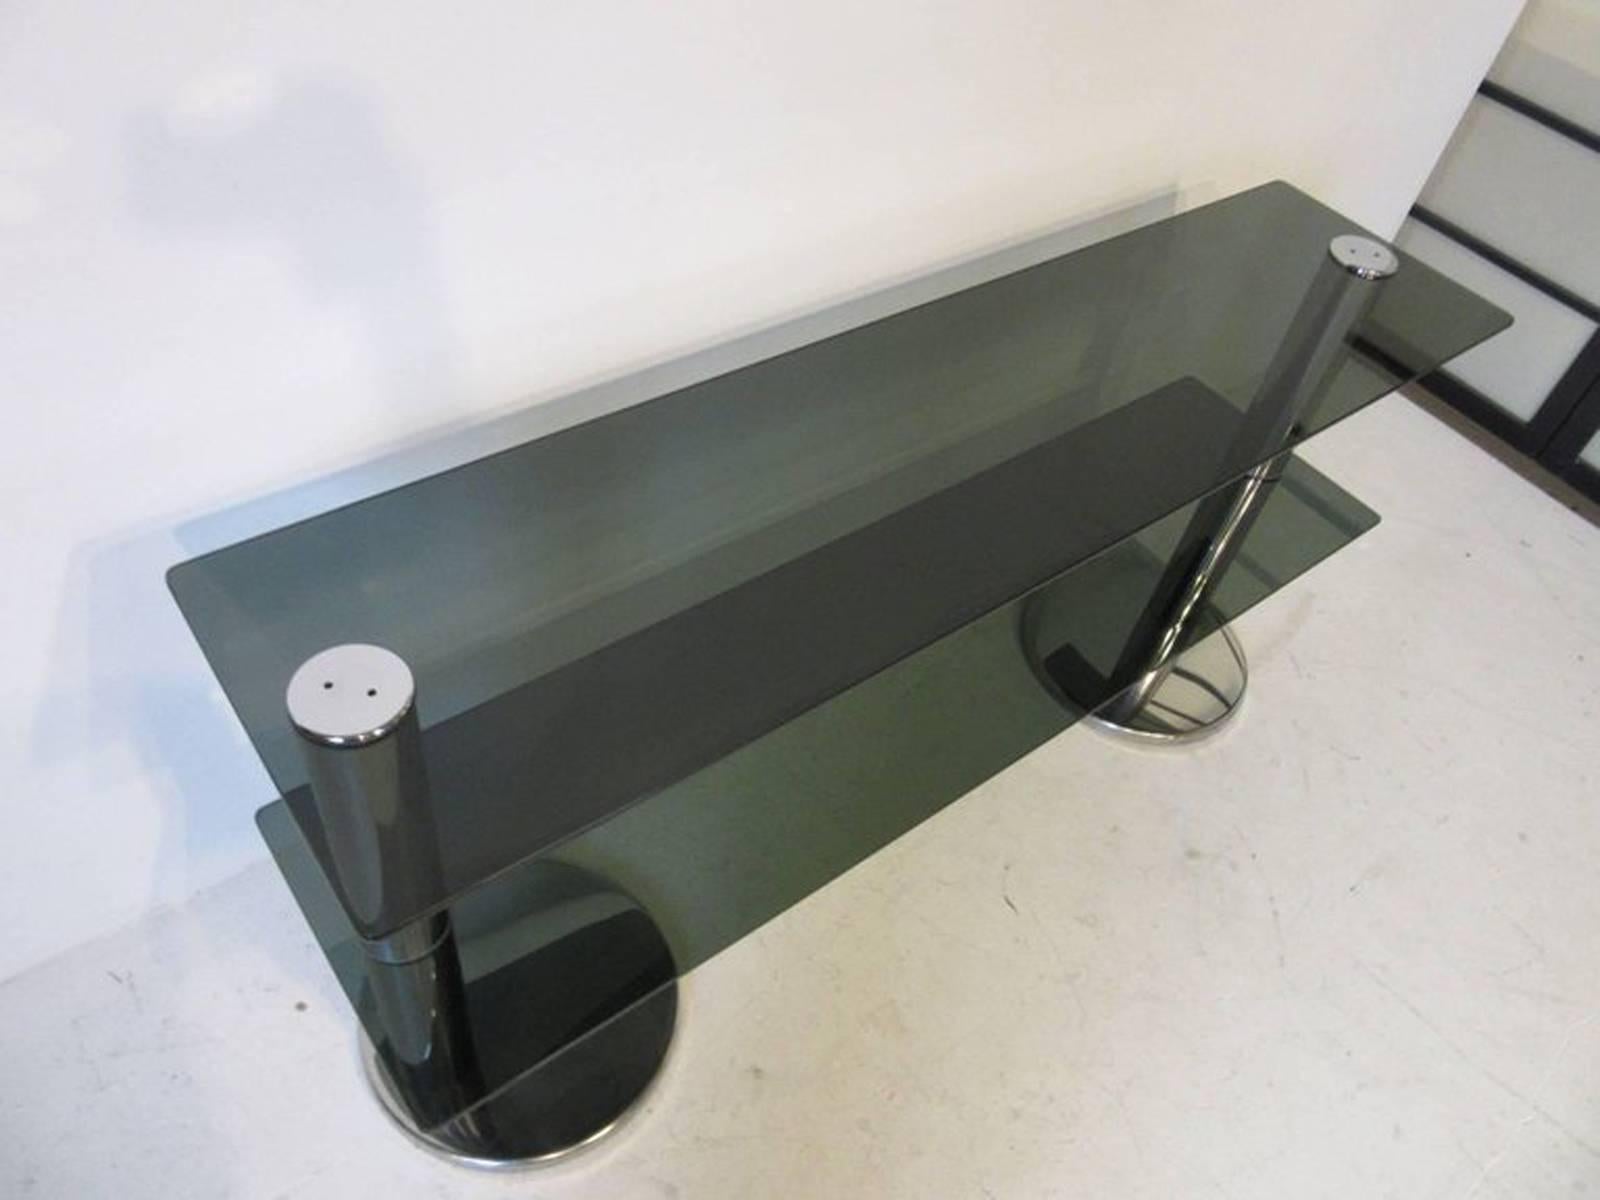 A chrome and glass console table or TV and entertainment stand with two shelves and rounded chrome bases. Very well-made and stabile a great design from the period and ready for a number of application.